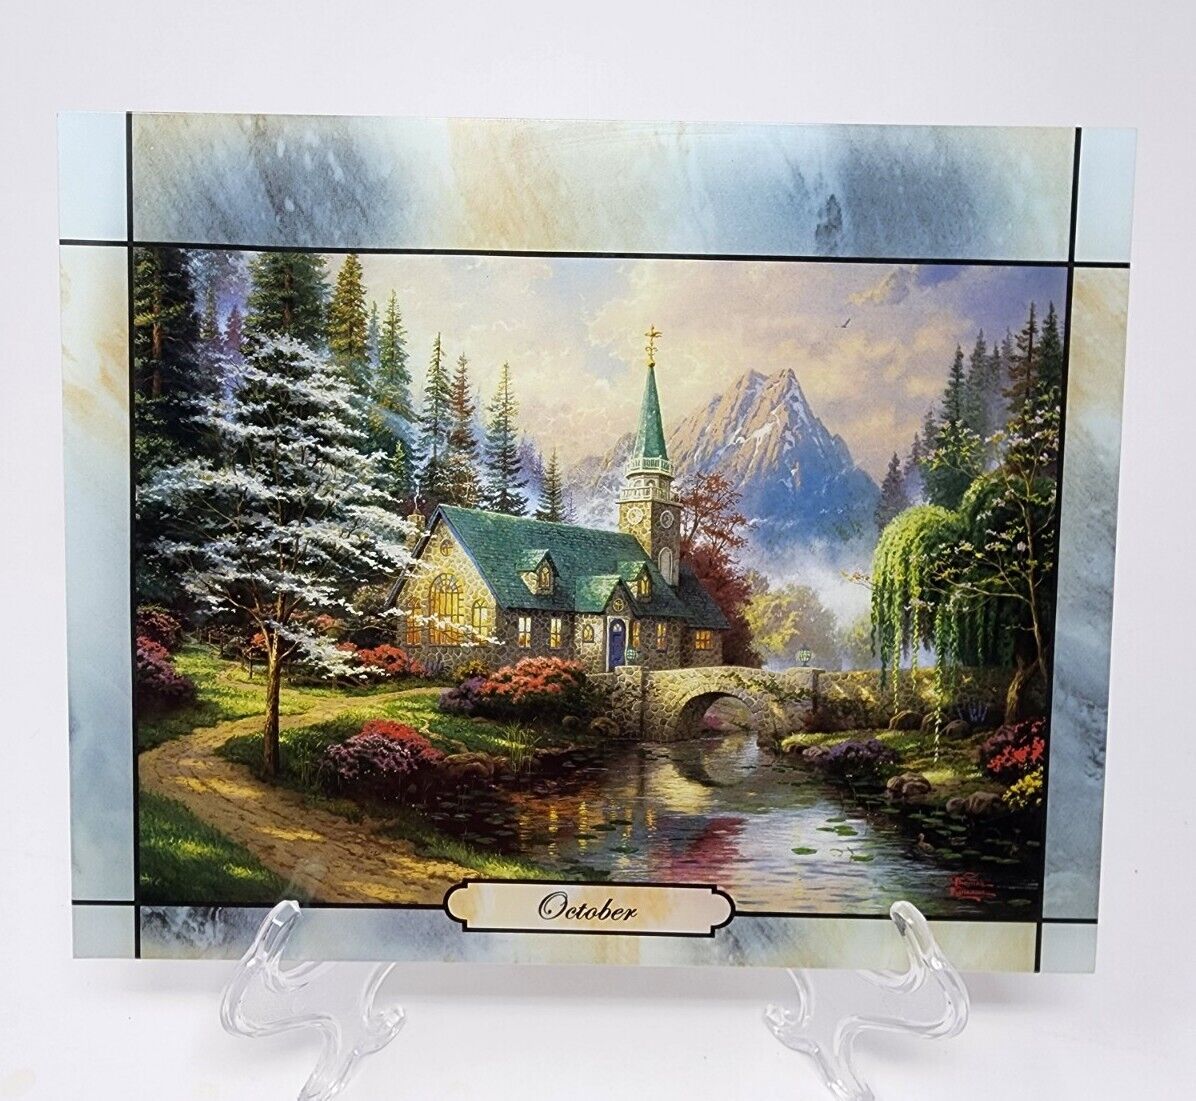 2006 Thomas Kinkade Seasons of Light Stained Glass Calendar Collection OCTOBER